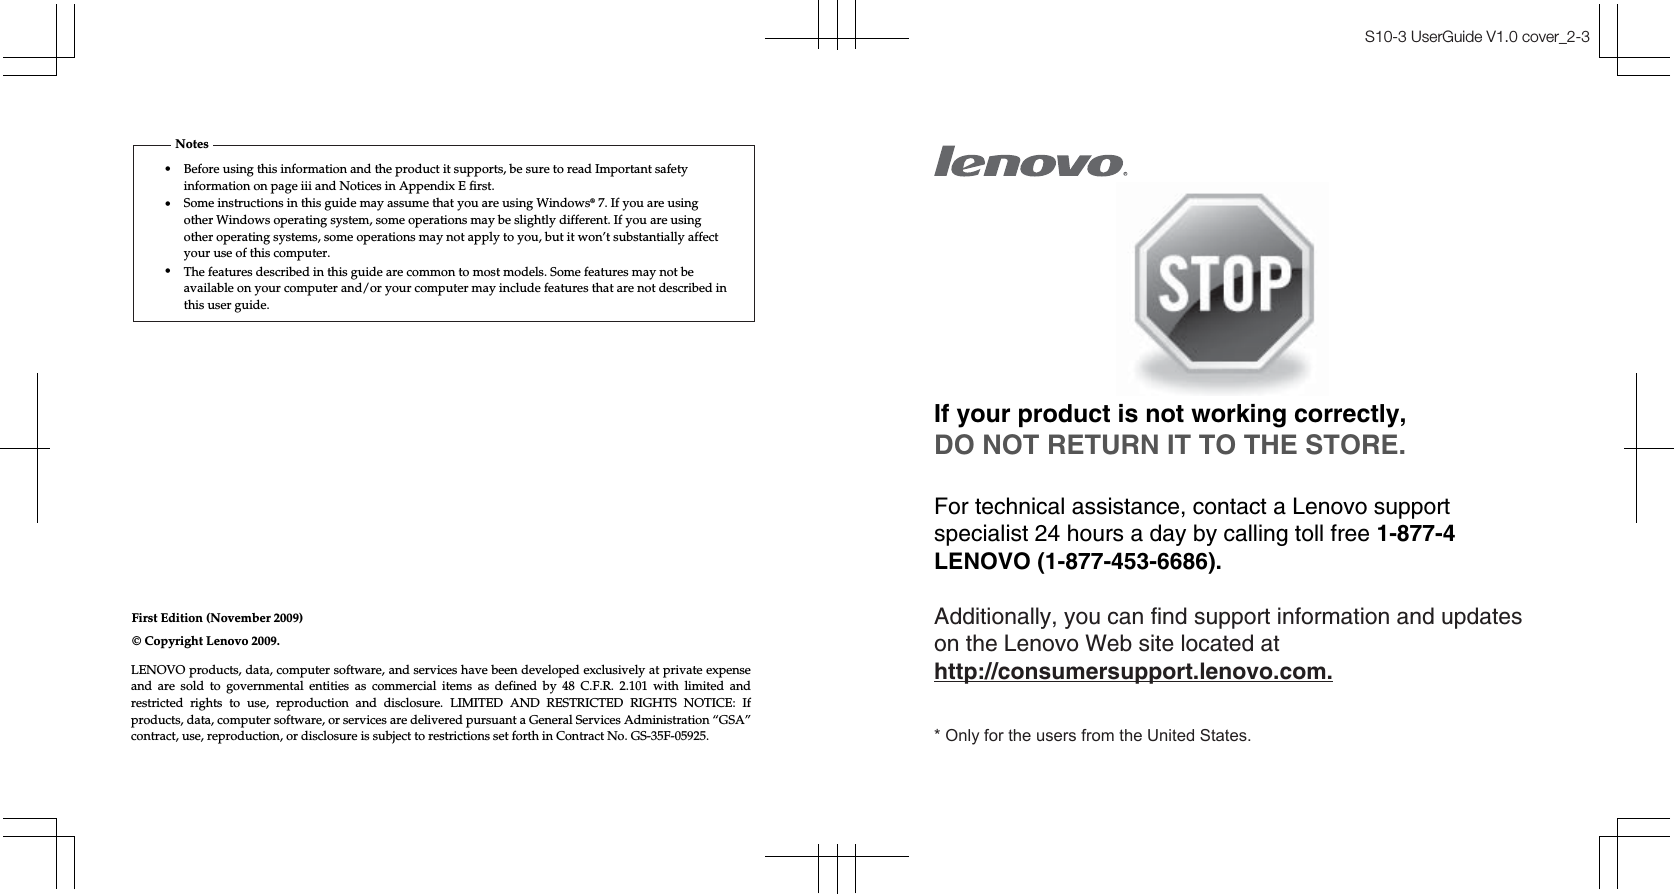 First Edition (November 2009)•Notes© Copyright Lenovo 2009. S10-3 UserGuide V1.0 cover_2-3If your product is not working correctly,DO NOT RETURN IT TO THE STORE.For technical assistance, contact a Lenovo supportspecialist 24 hours a day by calling toll free 1-877-4LENOVO (1-877-453-6686).Additionally, you can find support information and updateson the Lenovo Web site located athttp://consumersupport.lenovo.com.* Only for the users from the United States.Before using this information and the product it supports, be sure to read Important safety information on page iii and Notices in Appendix E first.•Some instructions in this guide may assume that you are using Windows® 7. If you are using other Windows operating system, some operations may be slightly different. If you are using other operating systems, some operations may not apply to you, but it won’t substantially affect your use of this computer.•The features described in this guide are common to most models. Some features may not be available on your computer and/or your computer may include features that are not described in this user guide.LENOVO products, data, computer software, and services have been developed exclusively at private expense and are sold to governmental entities as commercial items as defined by 48 C.F.R. 2.101 with limited and restricted rights to use, reproduction and disclosure. LIMITED AND RESTRICTED RIGHTS NOTICE: If products, data, computer software, or services are delivered pursuant a General Services Administration “GSA” contract, use, reproduction, or disclosure is subject to restrictions set forth in Contract No. GS-35F-05925.